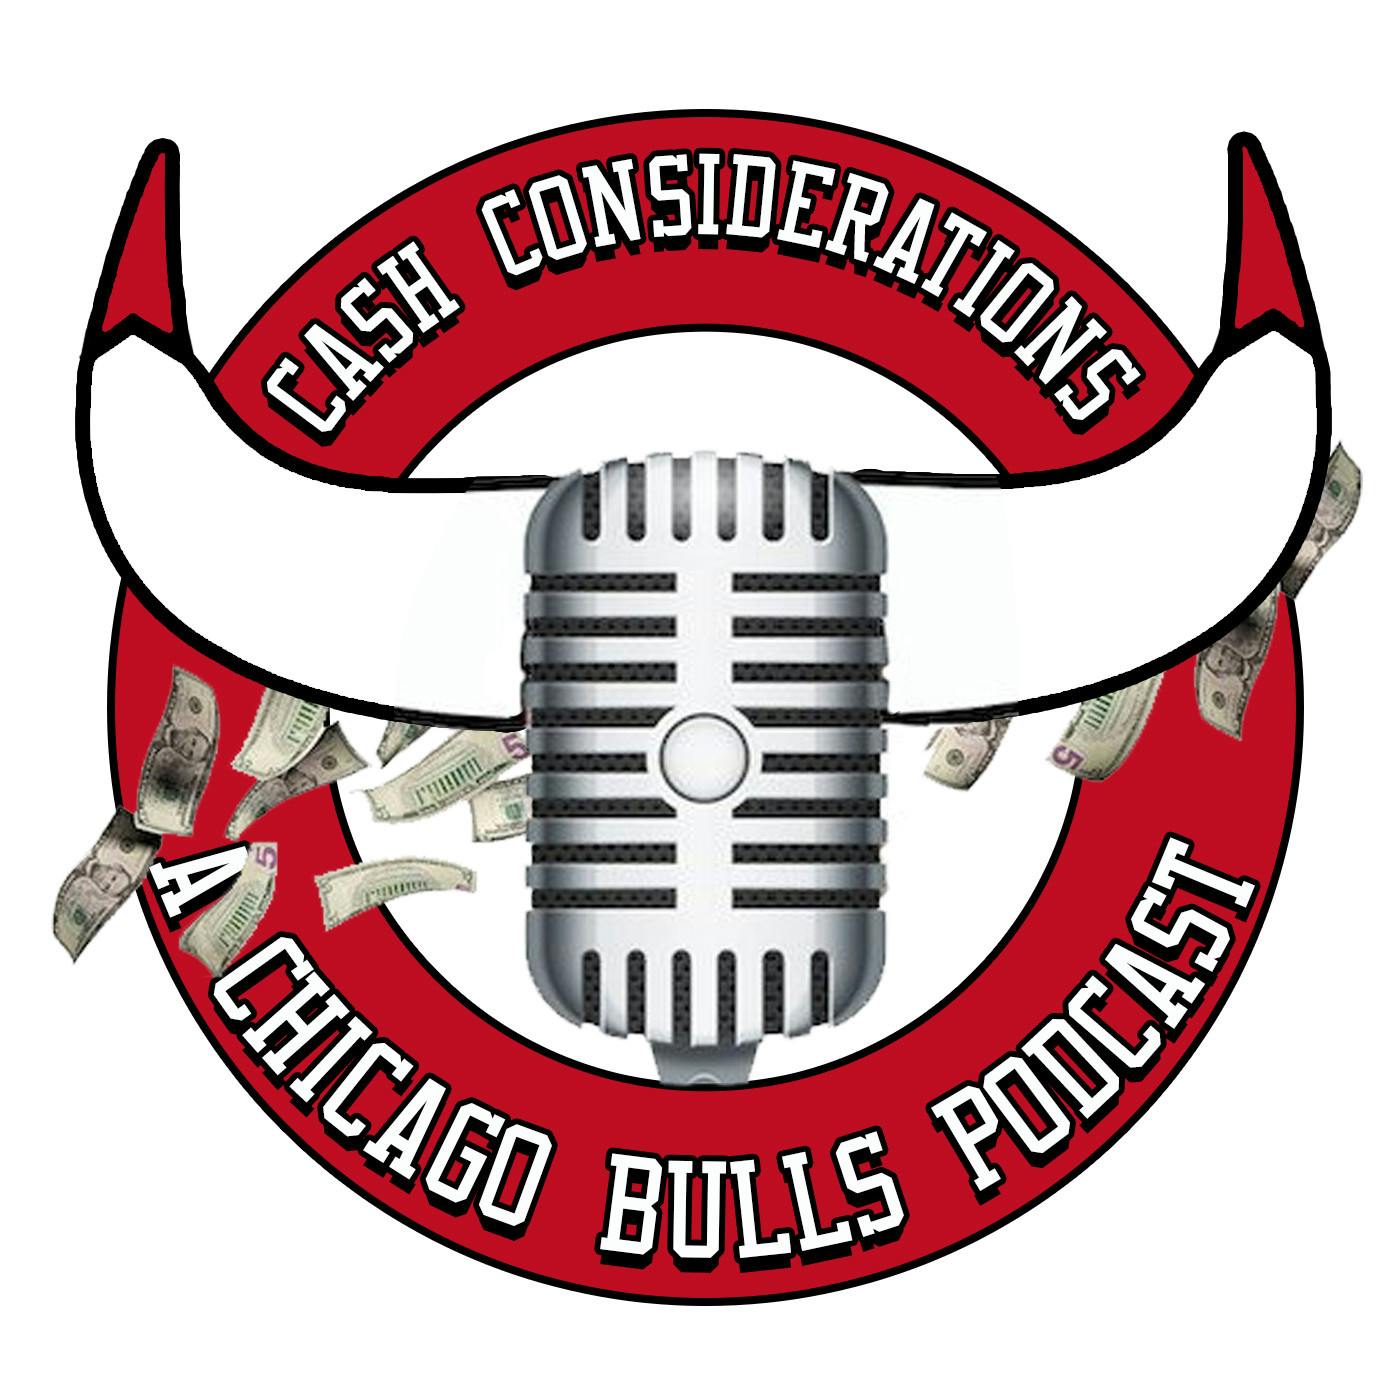 Cash Considerations Ep. 6: We're still talking about Jimmy Butler